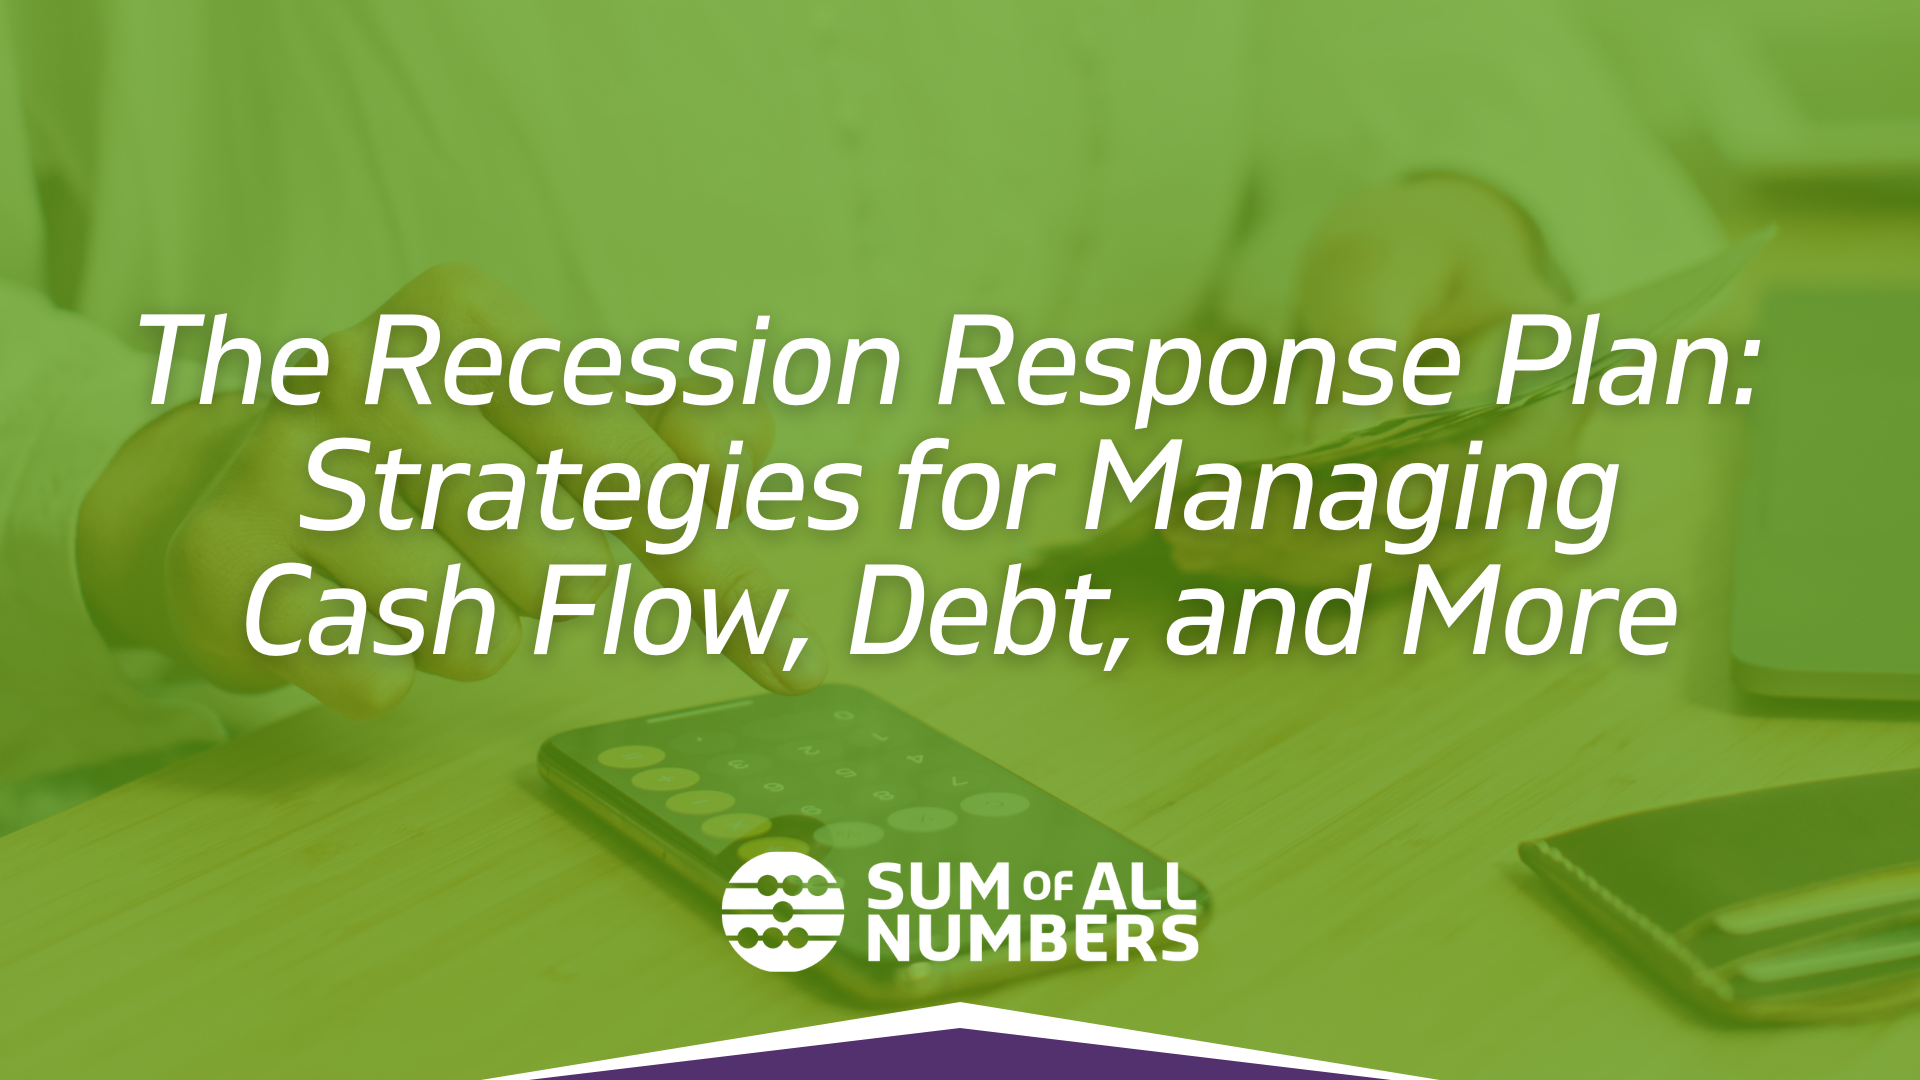 The Recession Response Plan: Strategies for Managing Cash Flow, Debt, and More